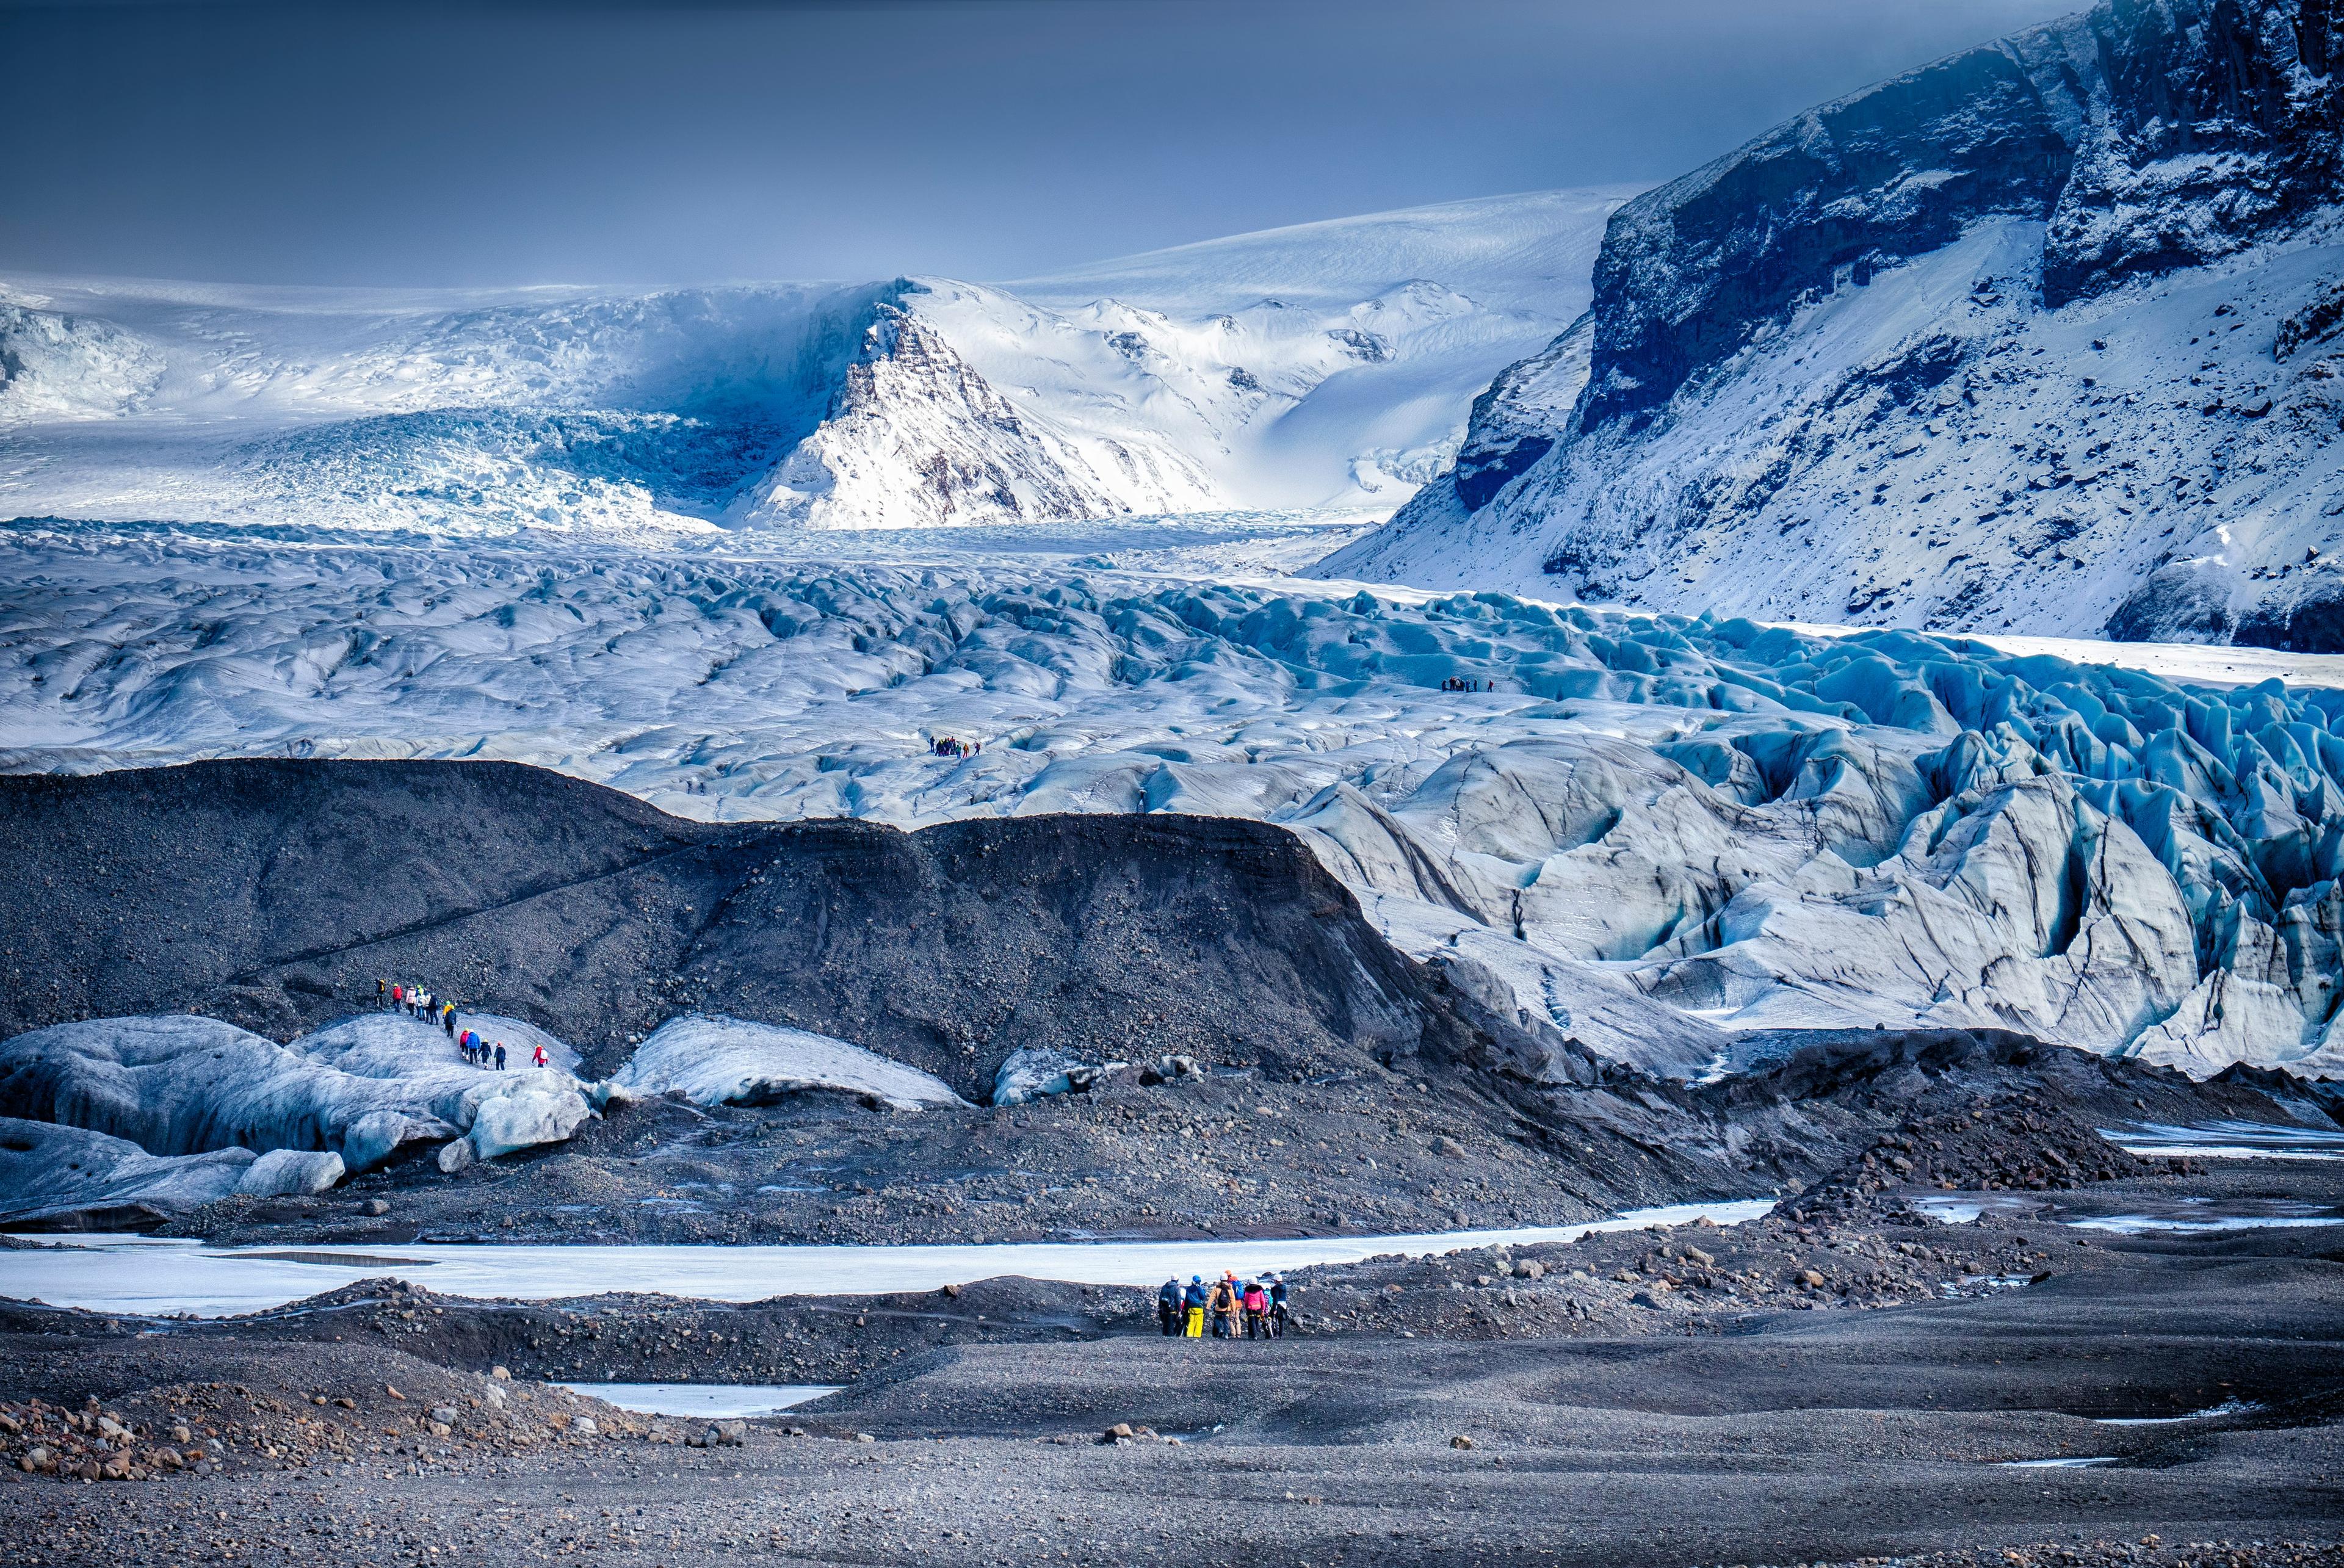 Groups of tourists near the edge of a vast glacier with deep blue crevasses and rugged ice formations, set against a backdrop of snowy mountains.